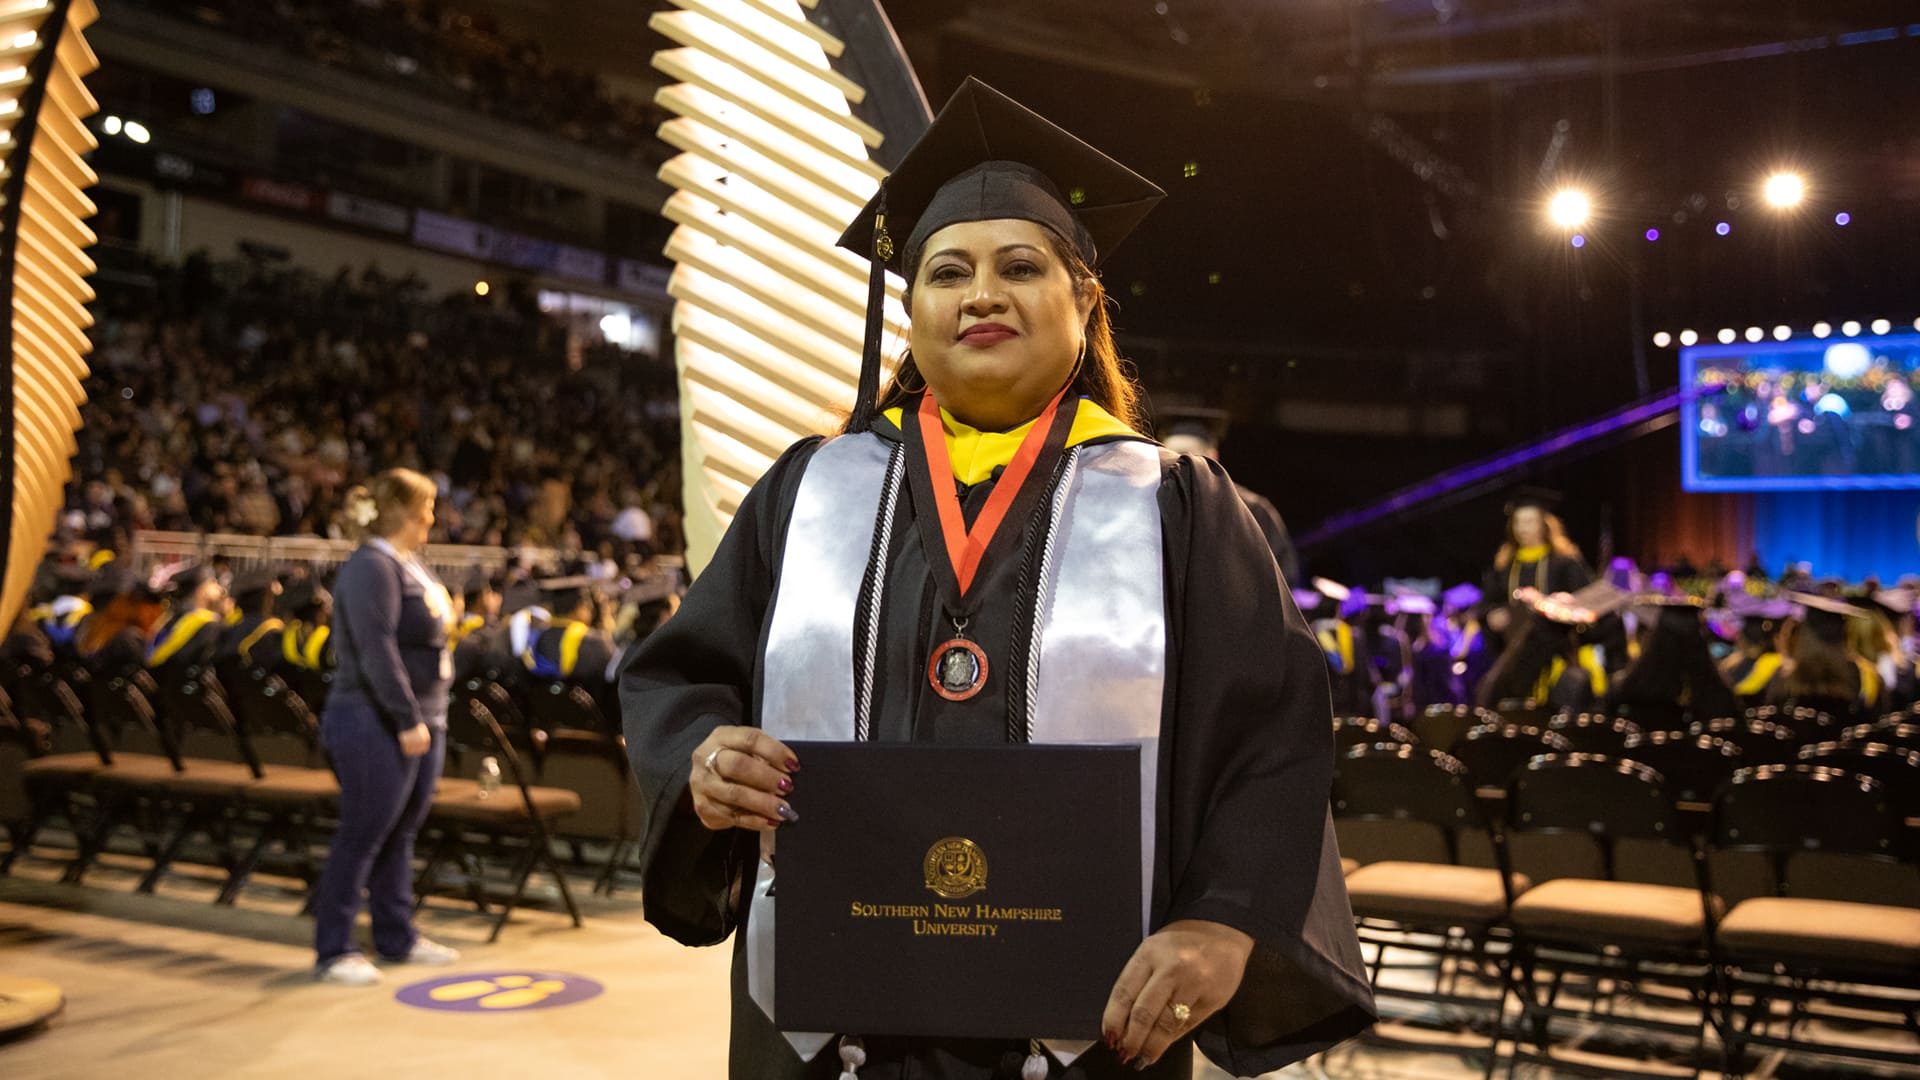 Karie Lamb, who earned her degree in 2023, wearing her cap and gown, holding her SNHU diploma in front of her while standing in the SNHU Arena at a Commencement ceremony.